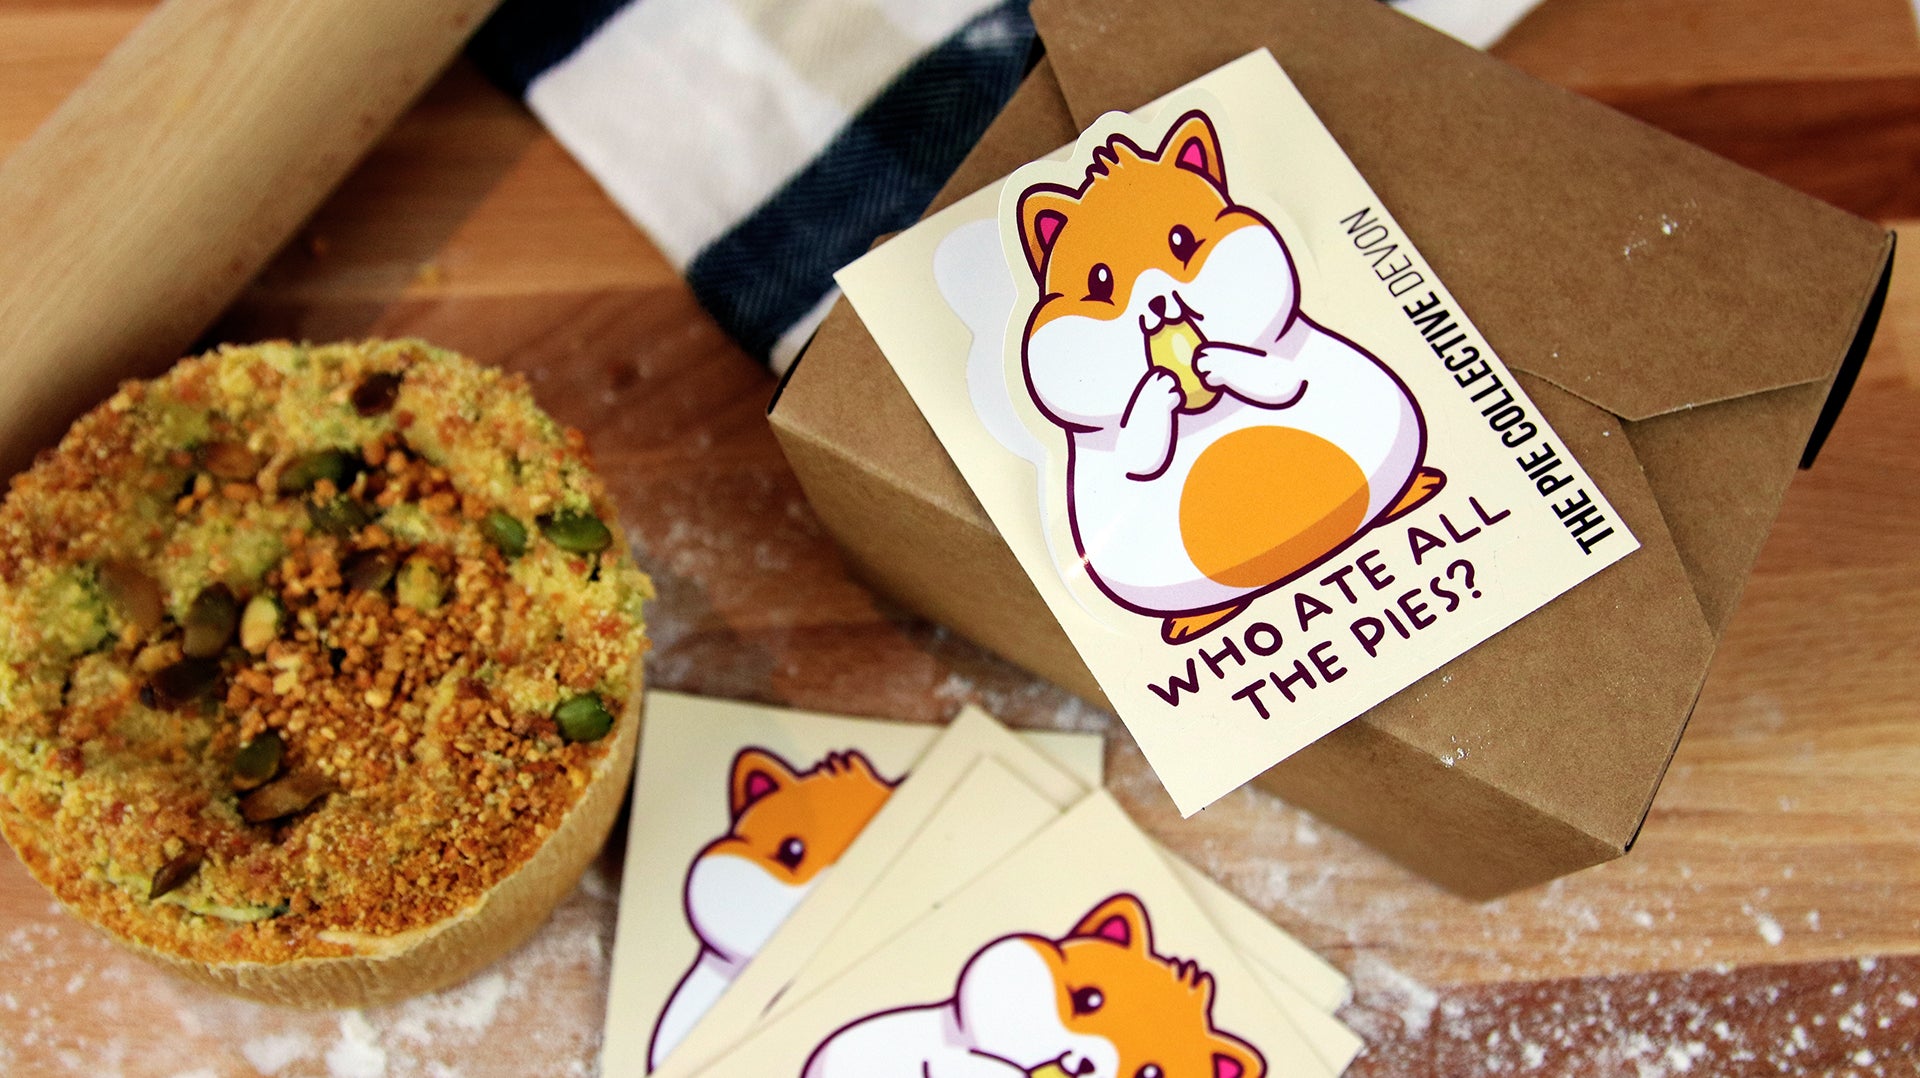 Peeled white vinyl bakery label with hamster design applied to a cardboard food box